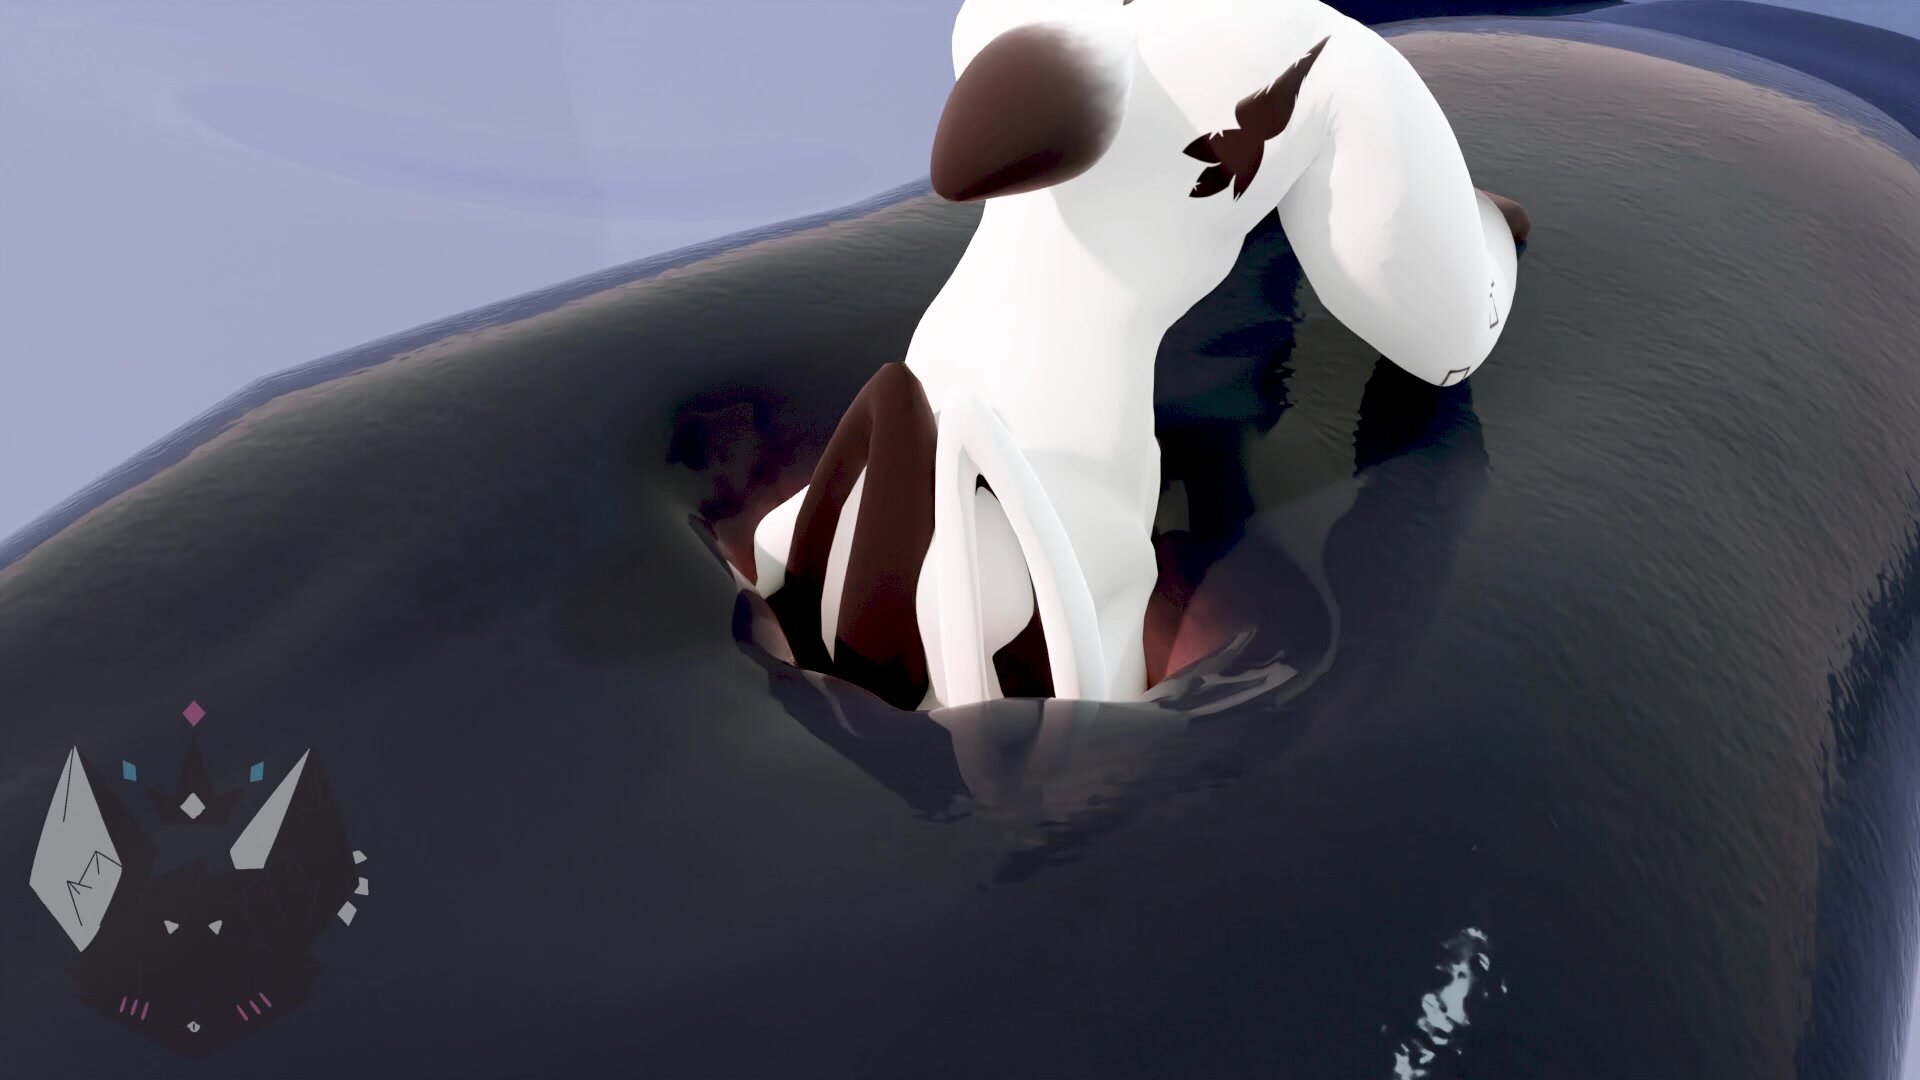 Deep In An Orca Hole (ANAL VORE) - ThisVid.com